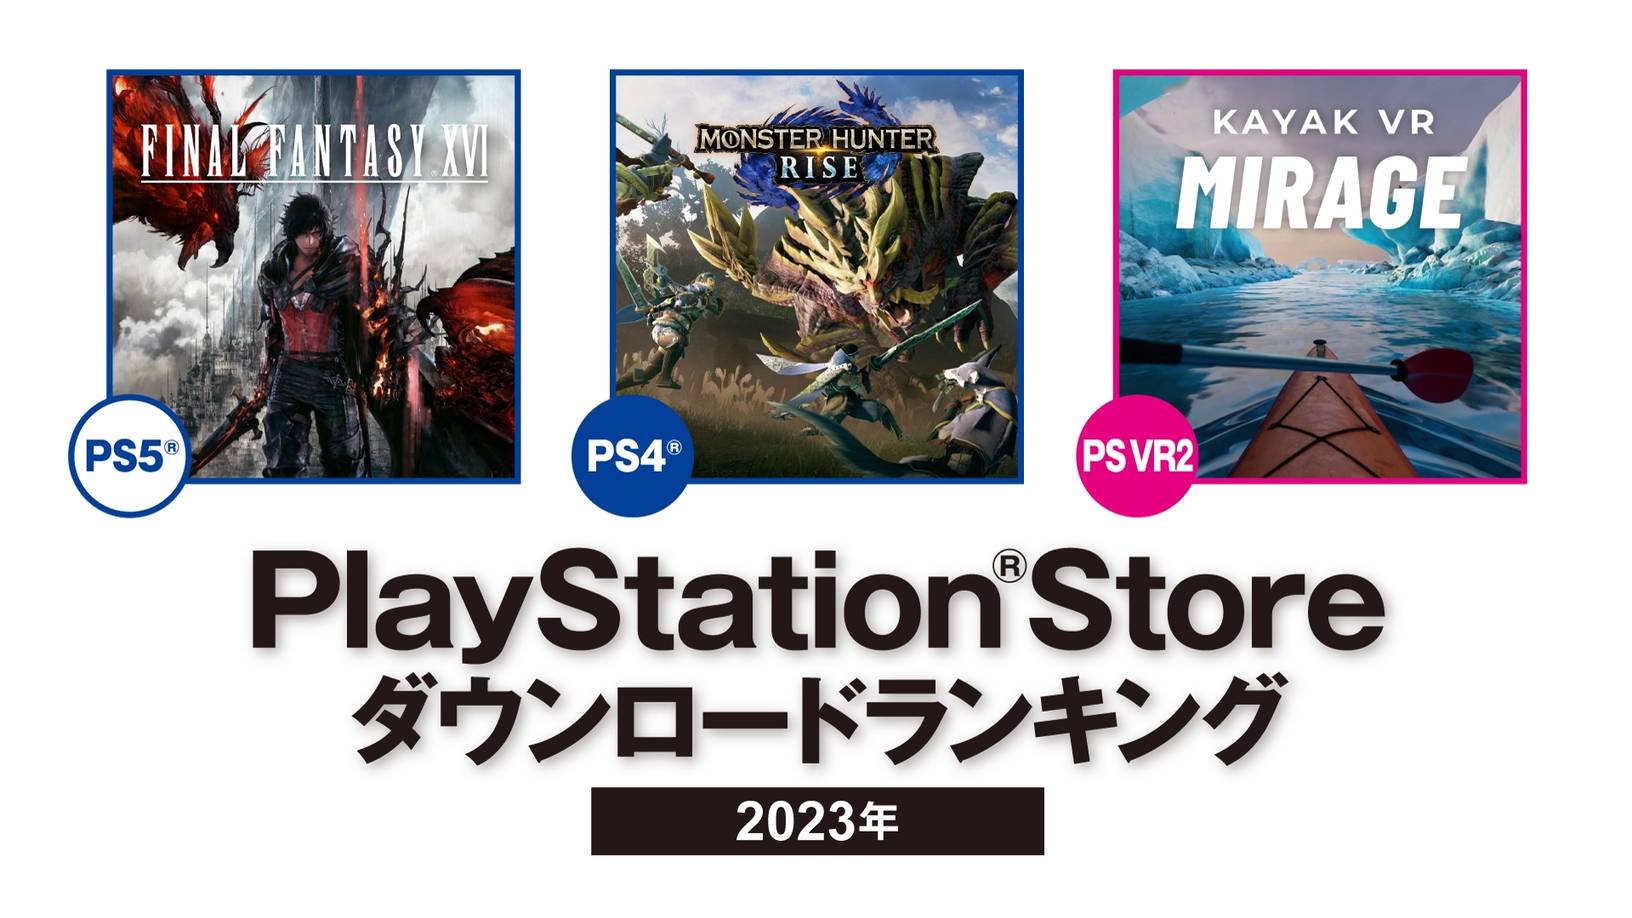 Upcoming PS5 games for 2023: Biggest releases, from Hogwarts Legacy to  Resident Evil